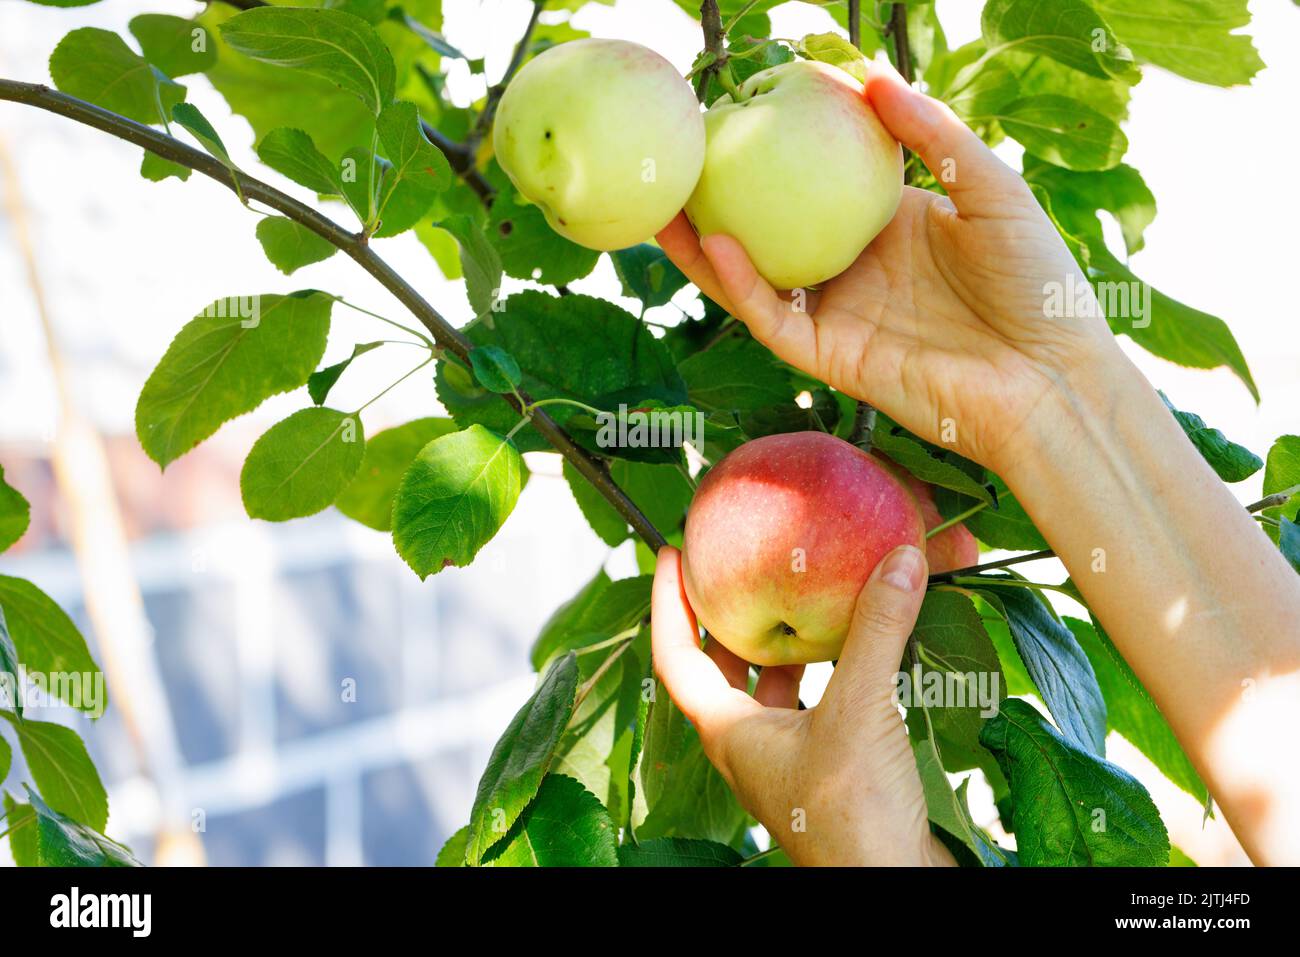 A woman's hand picks ripe apples from a tree in a summer garden. Stock Photo